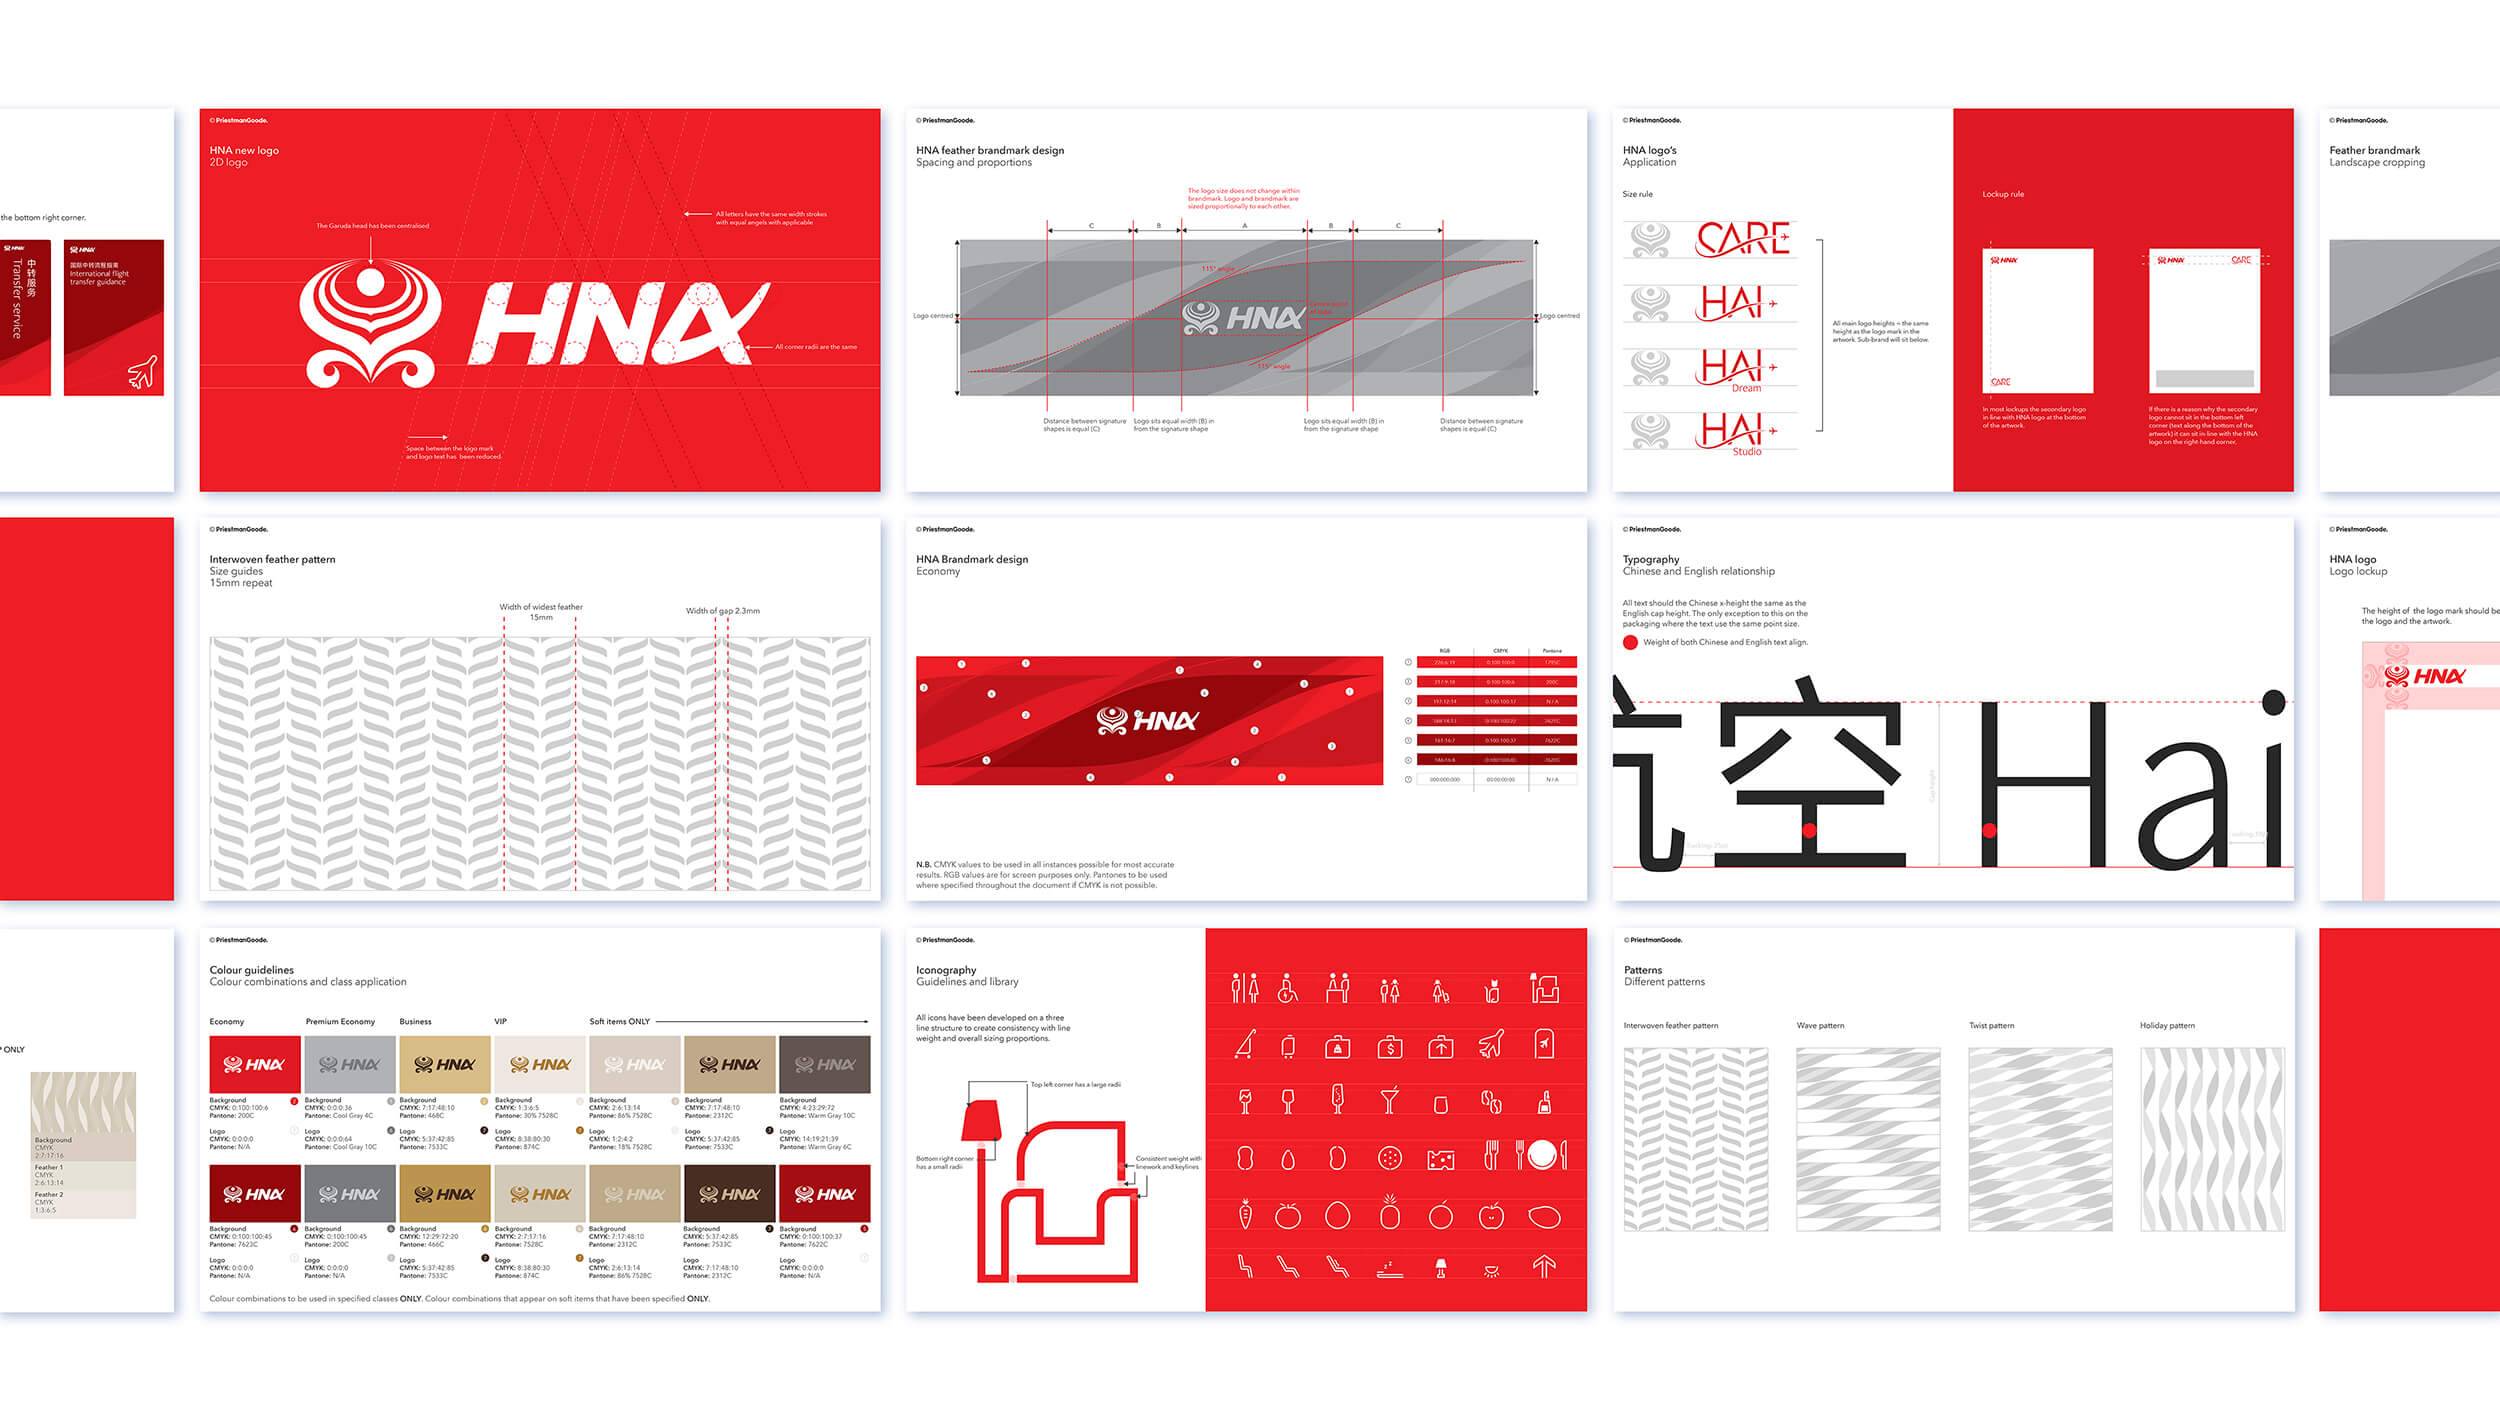 Different fonts, patterns, logos and colours that make up the HNA brand